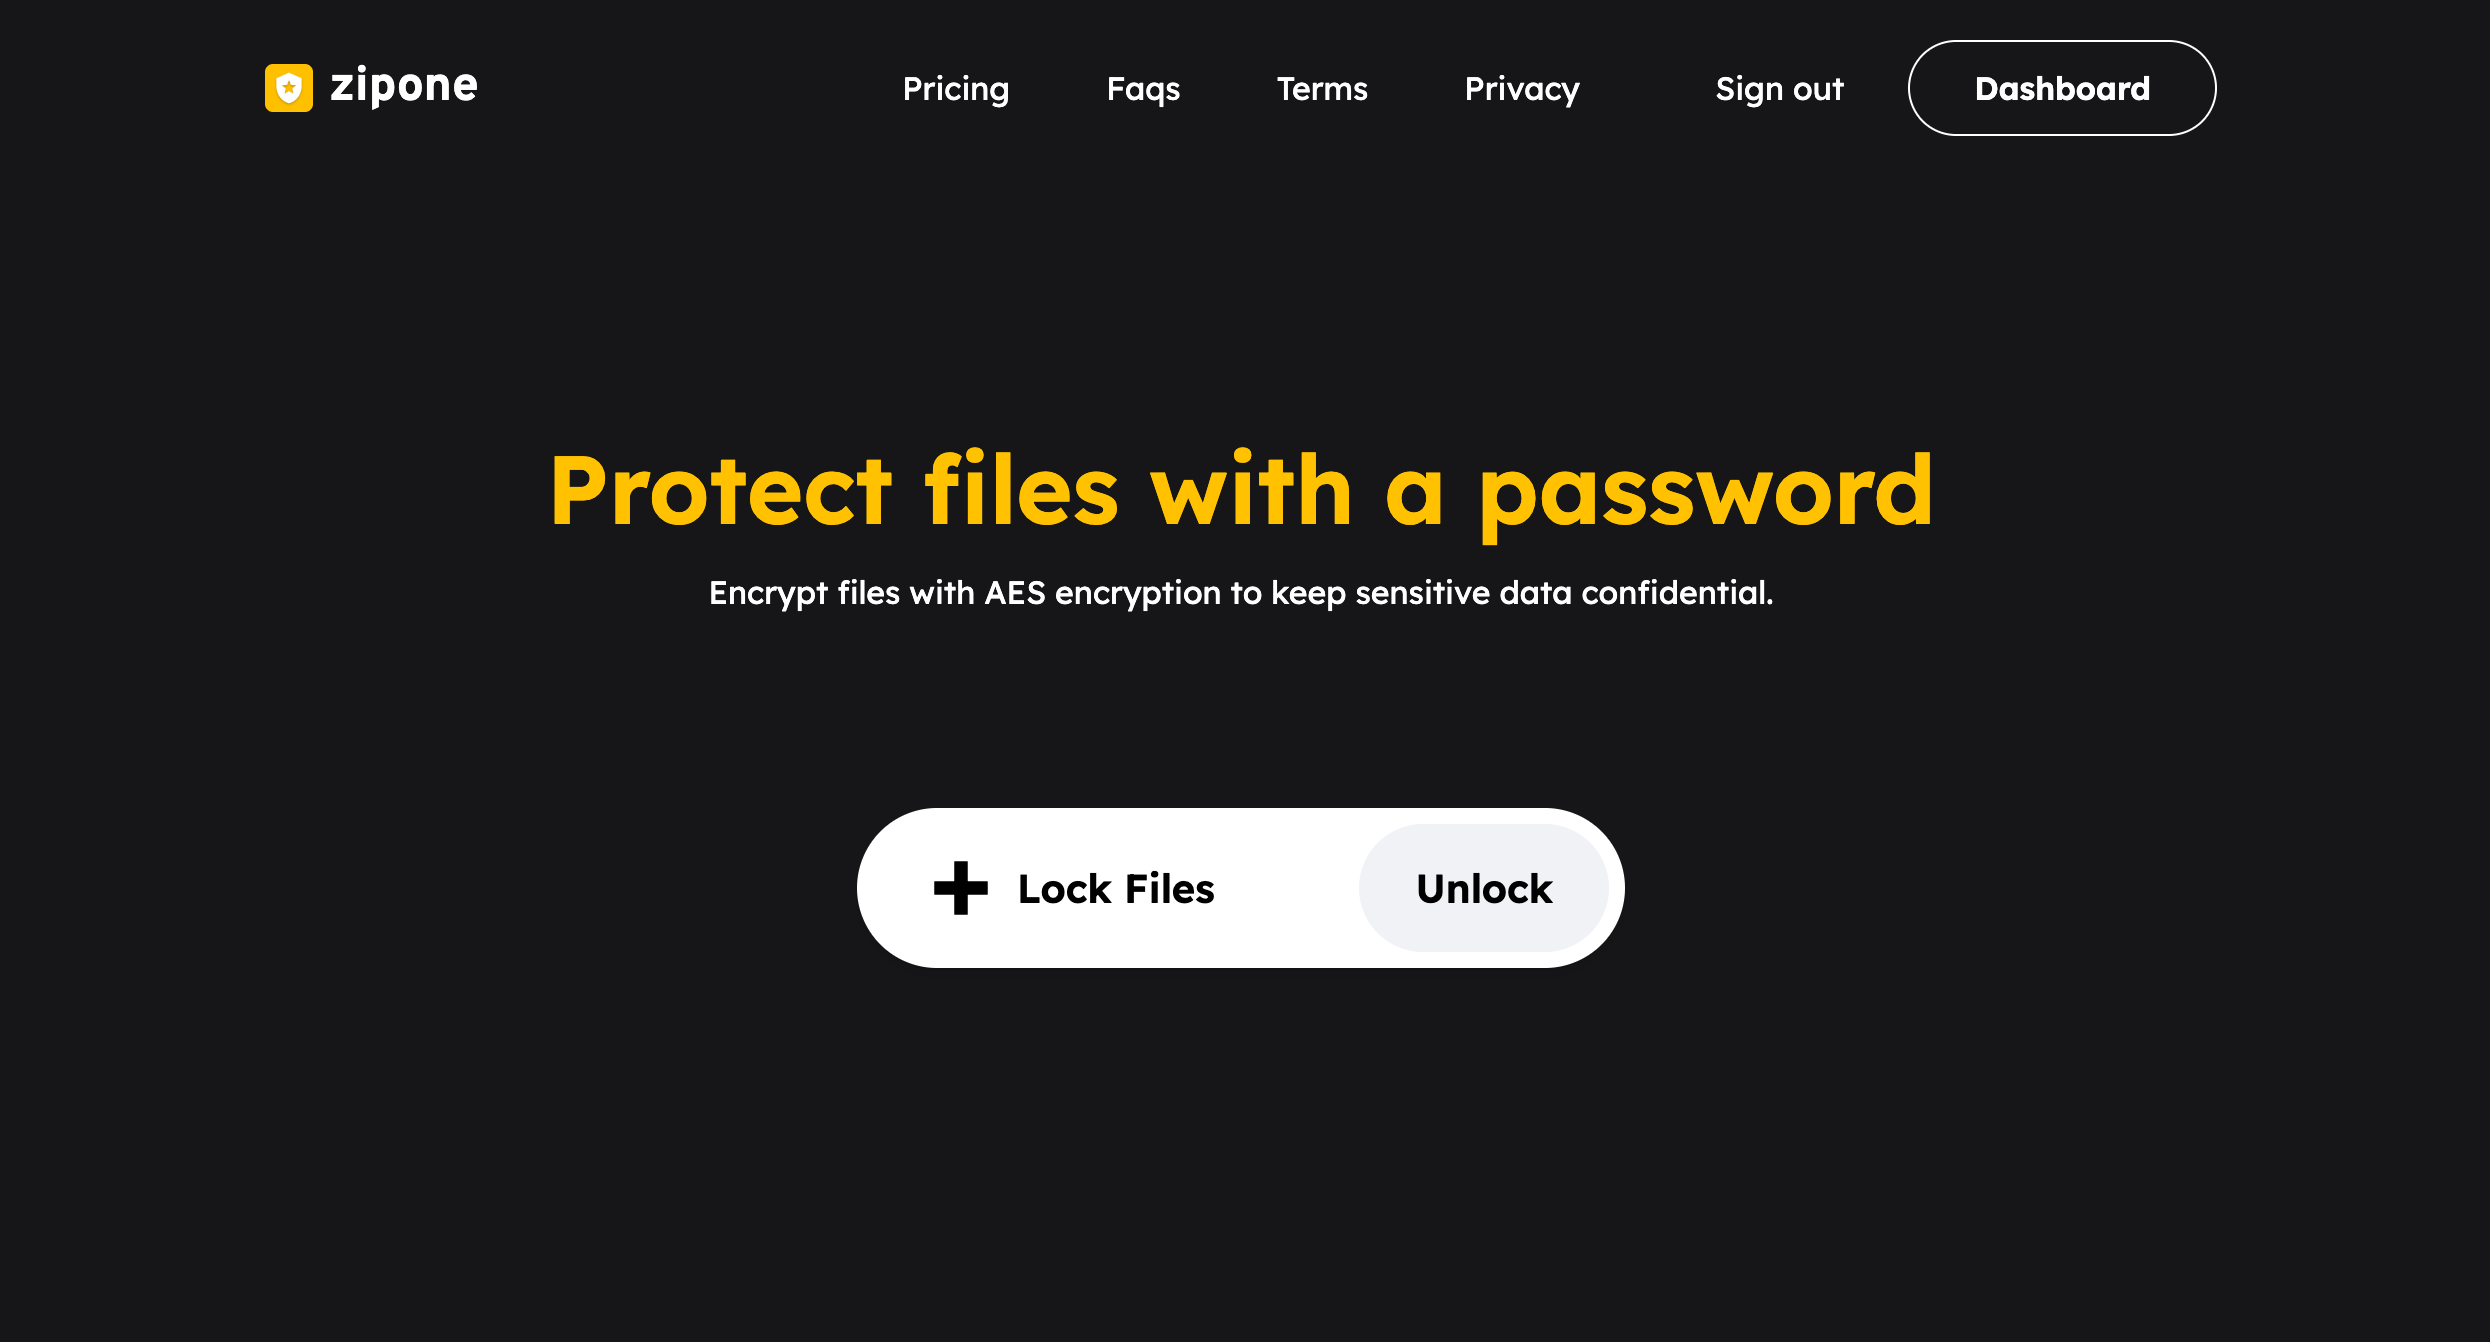 A free online app that allows you password protect any file to keep sensitive data confidential. Whether you are an individual user or a small business owner, ZipOne provides a simple yet effective solution to safeguard your confidential data.